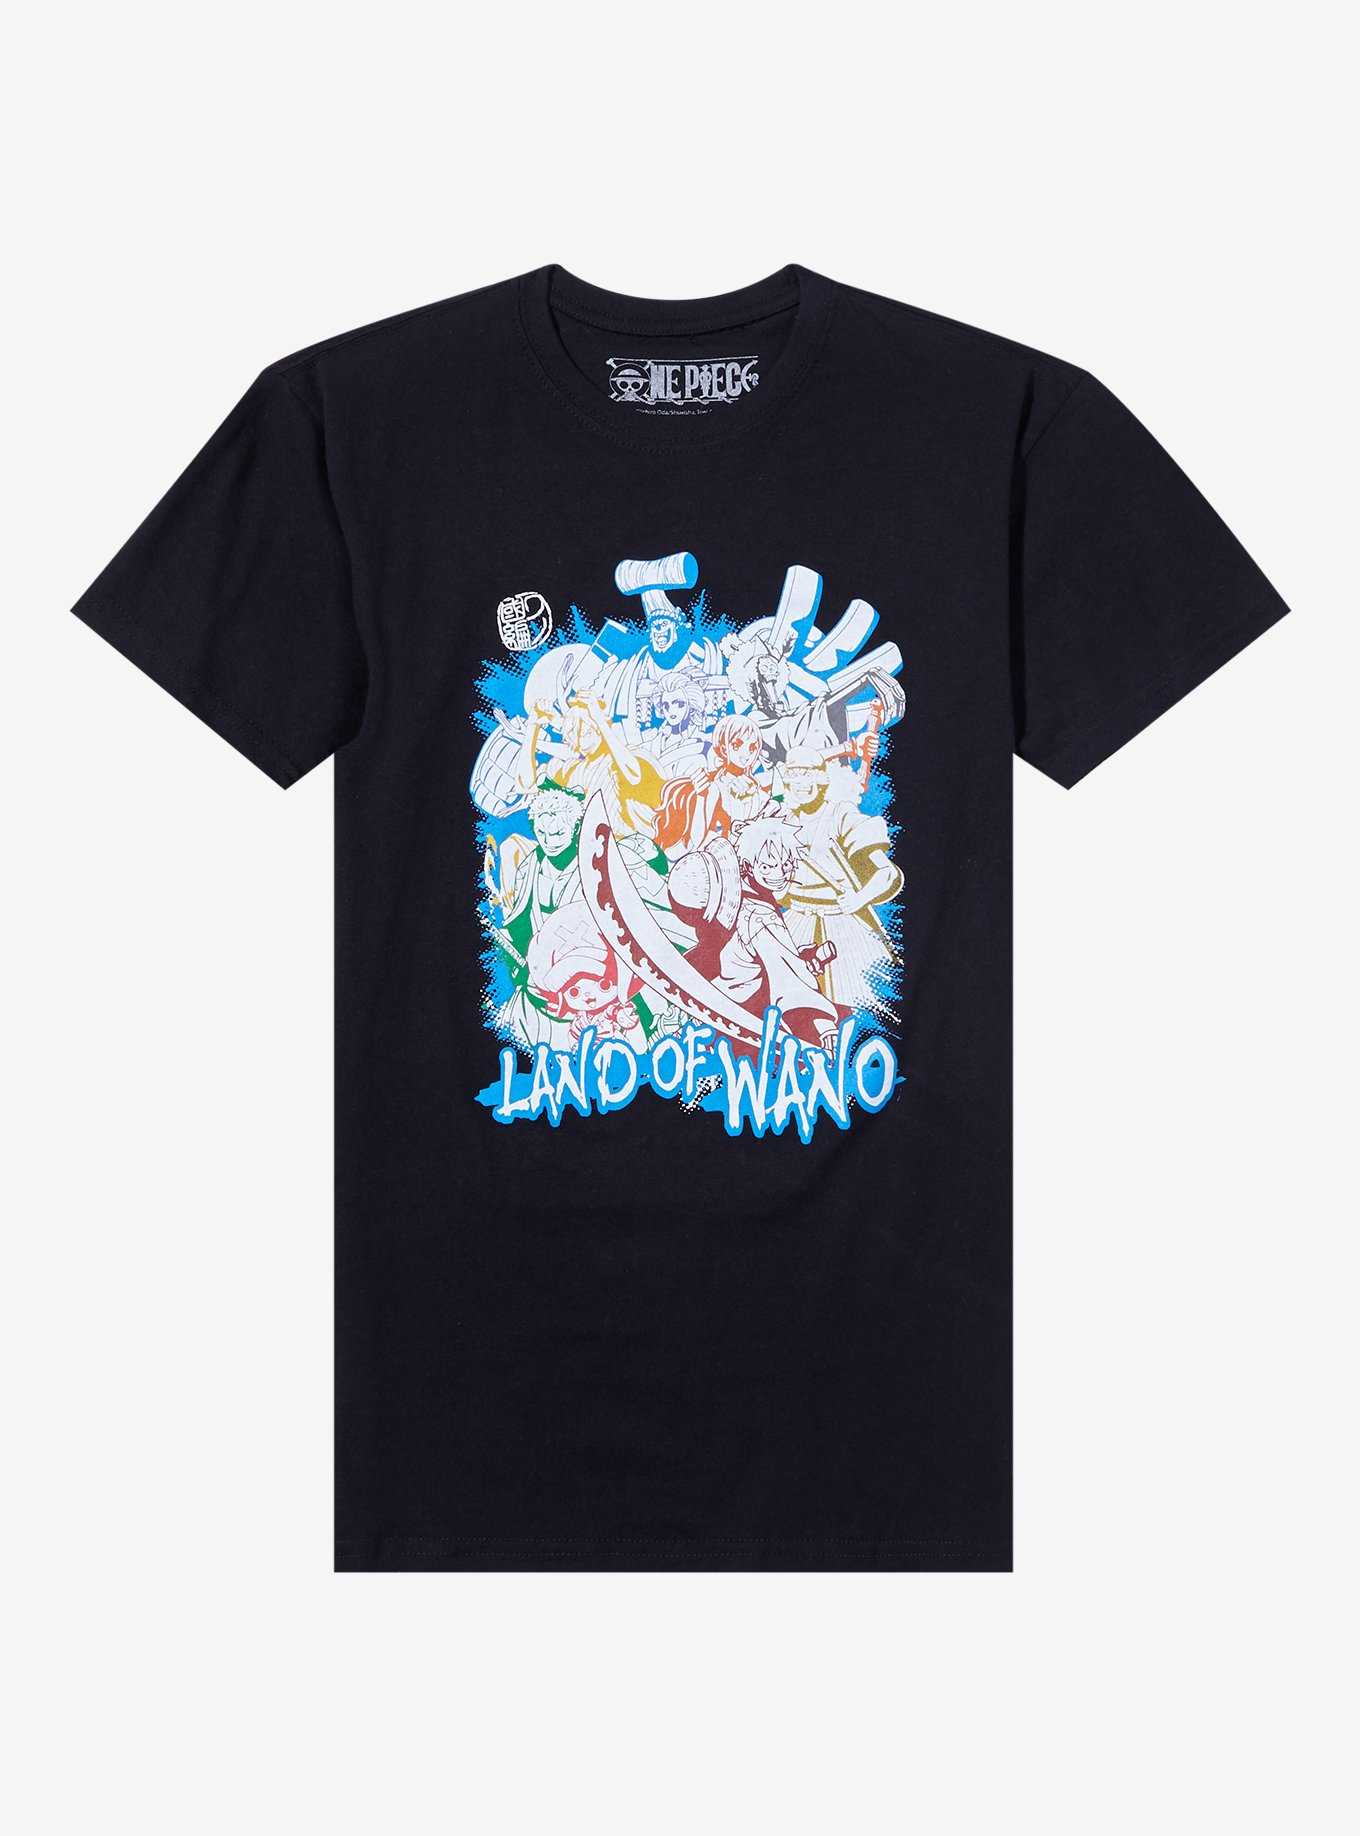 One Piece Land Of Wano Group T-Shirt, , hi-res